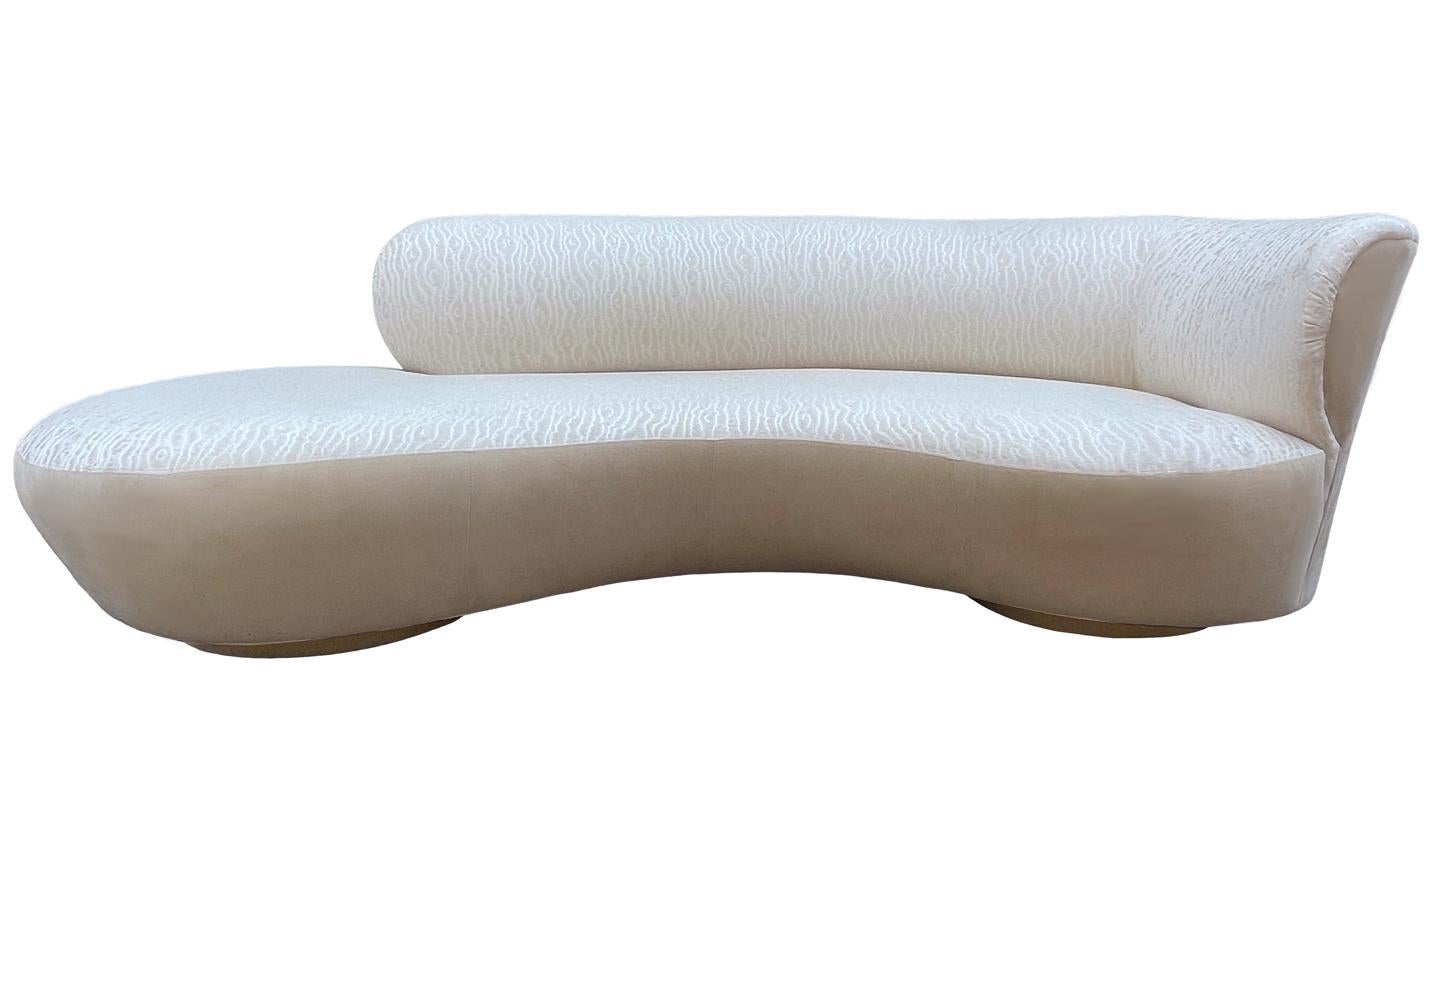 Mid-Century Modern Mid Century Modern Curved Sculptural Serpentine Cloud Sofa or Chaise Lounge For Sale